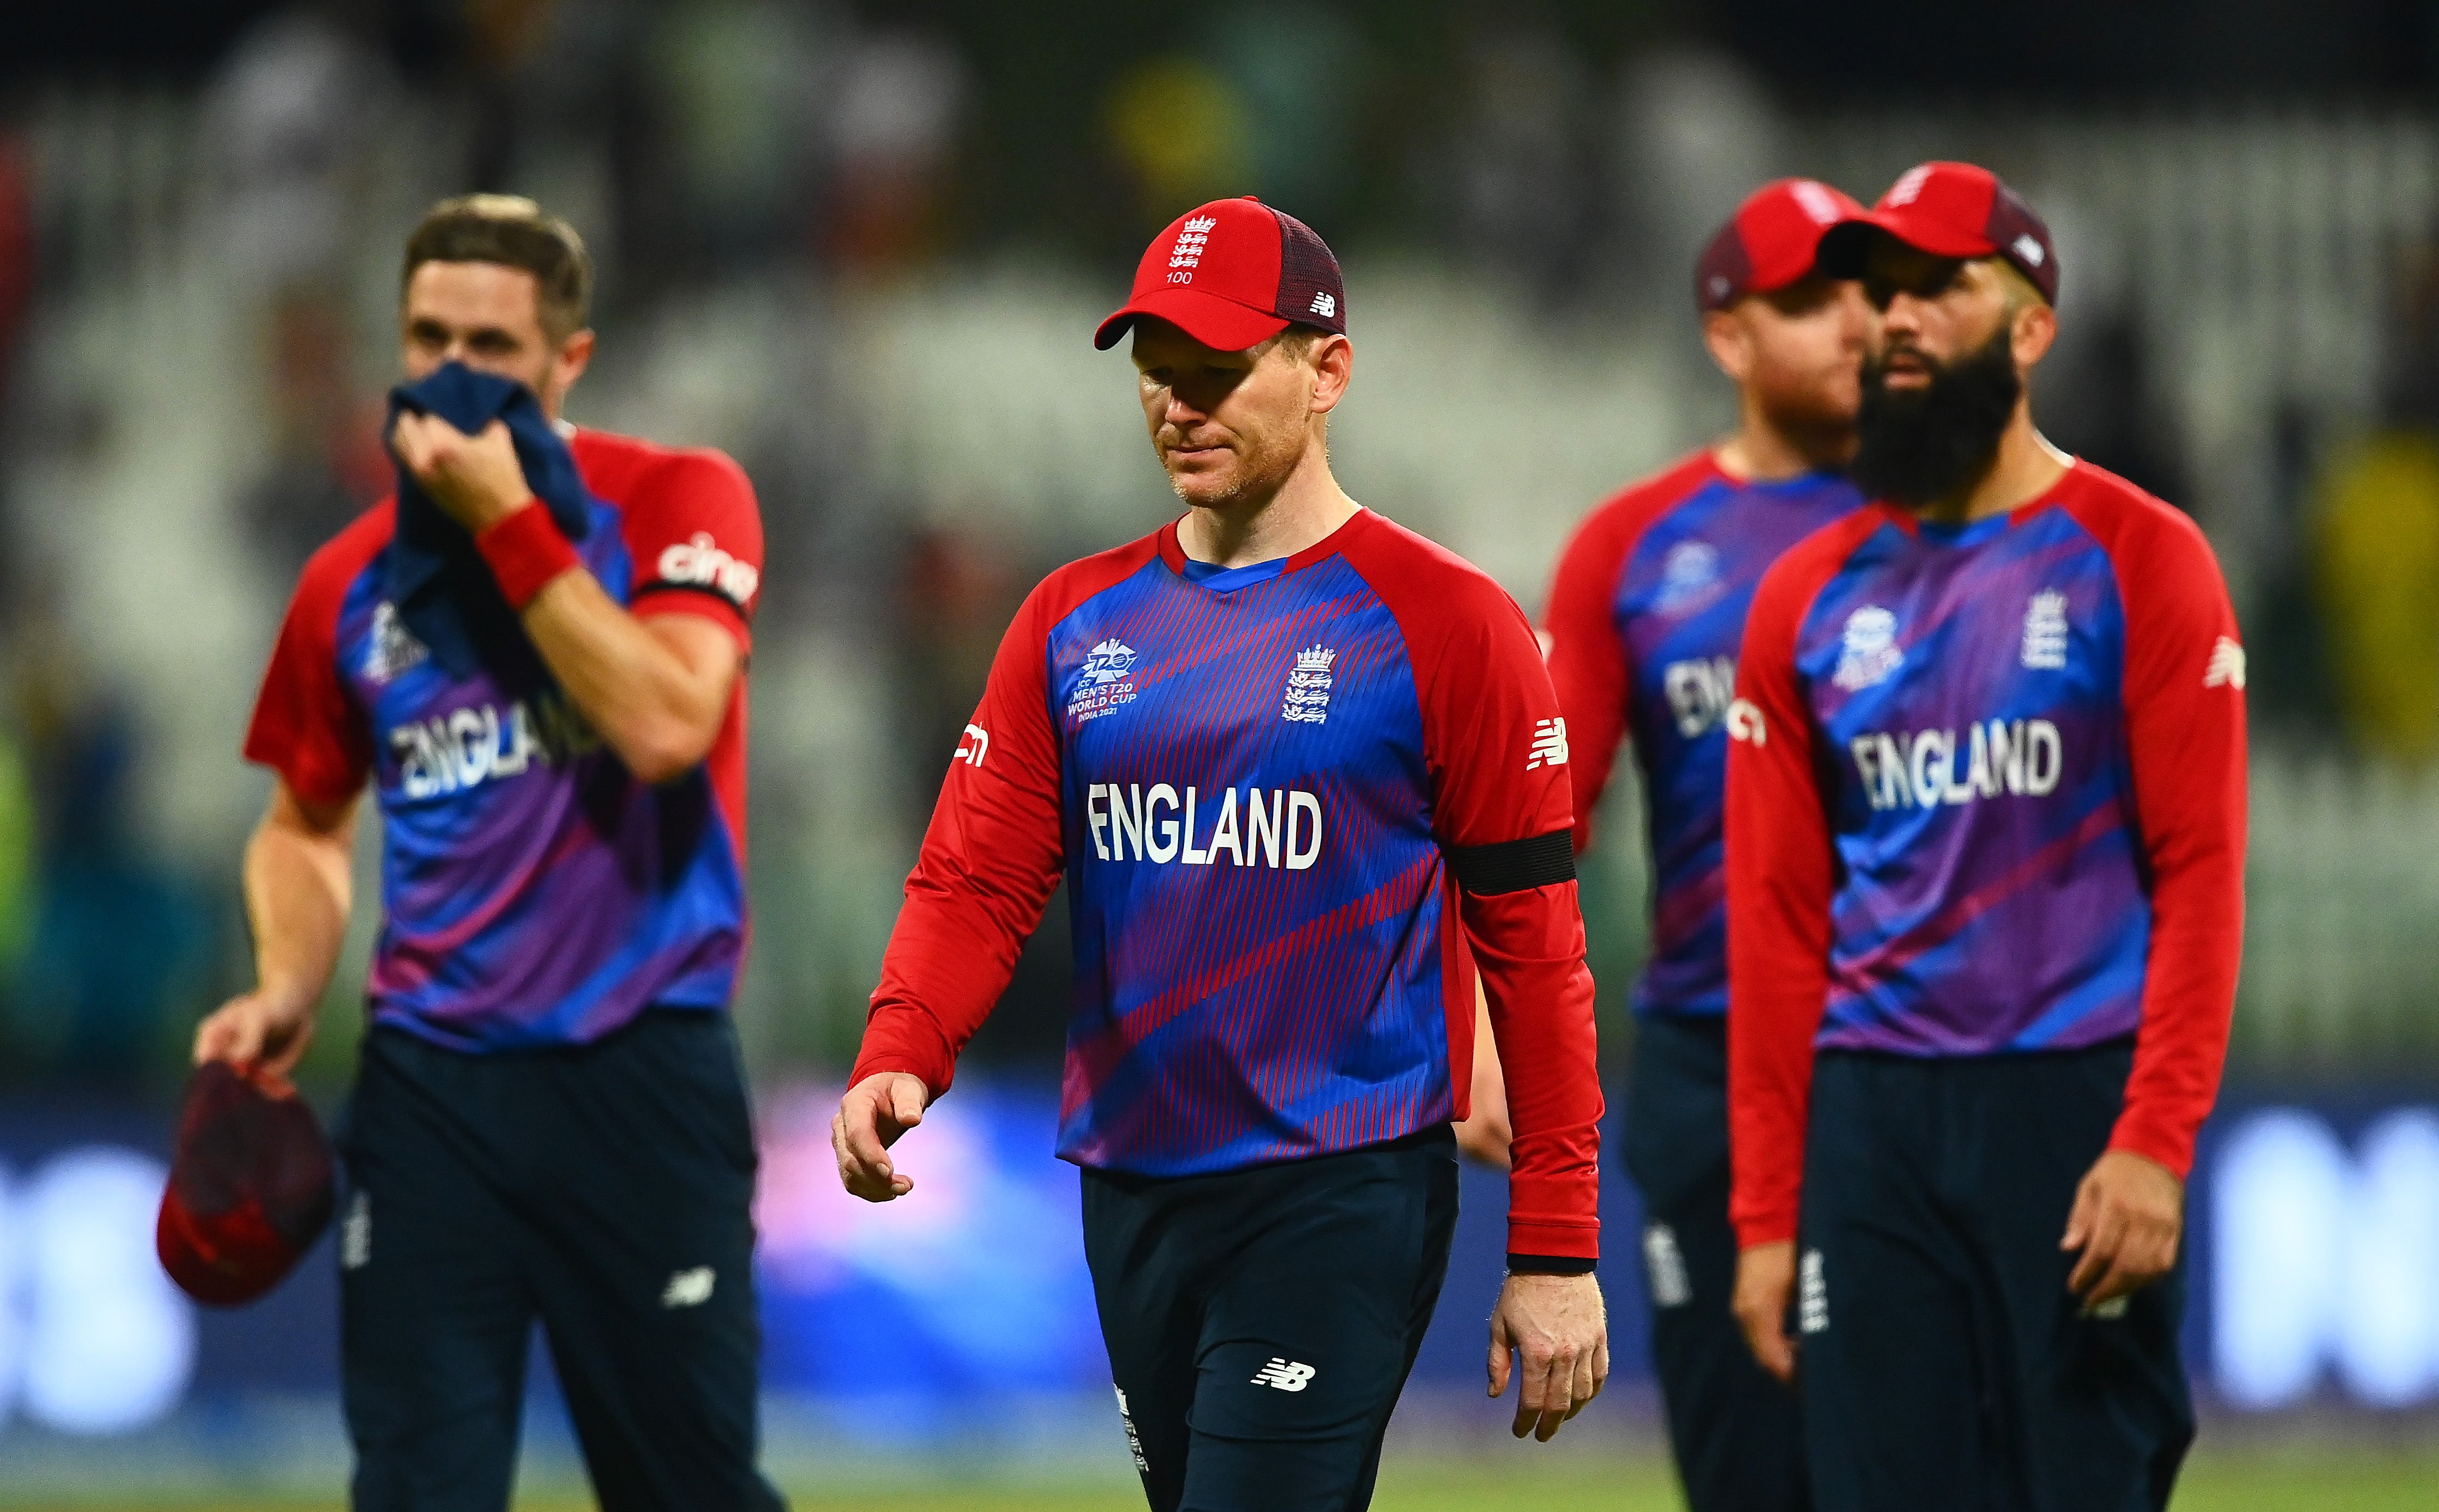 Eoin Morgan’s side fell at the semi-final stage